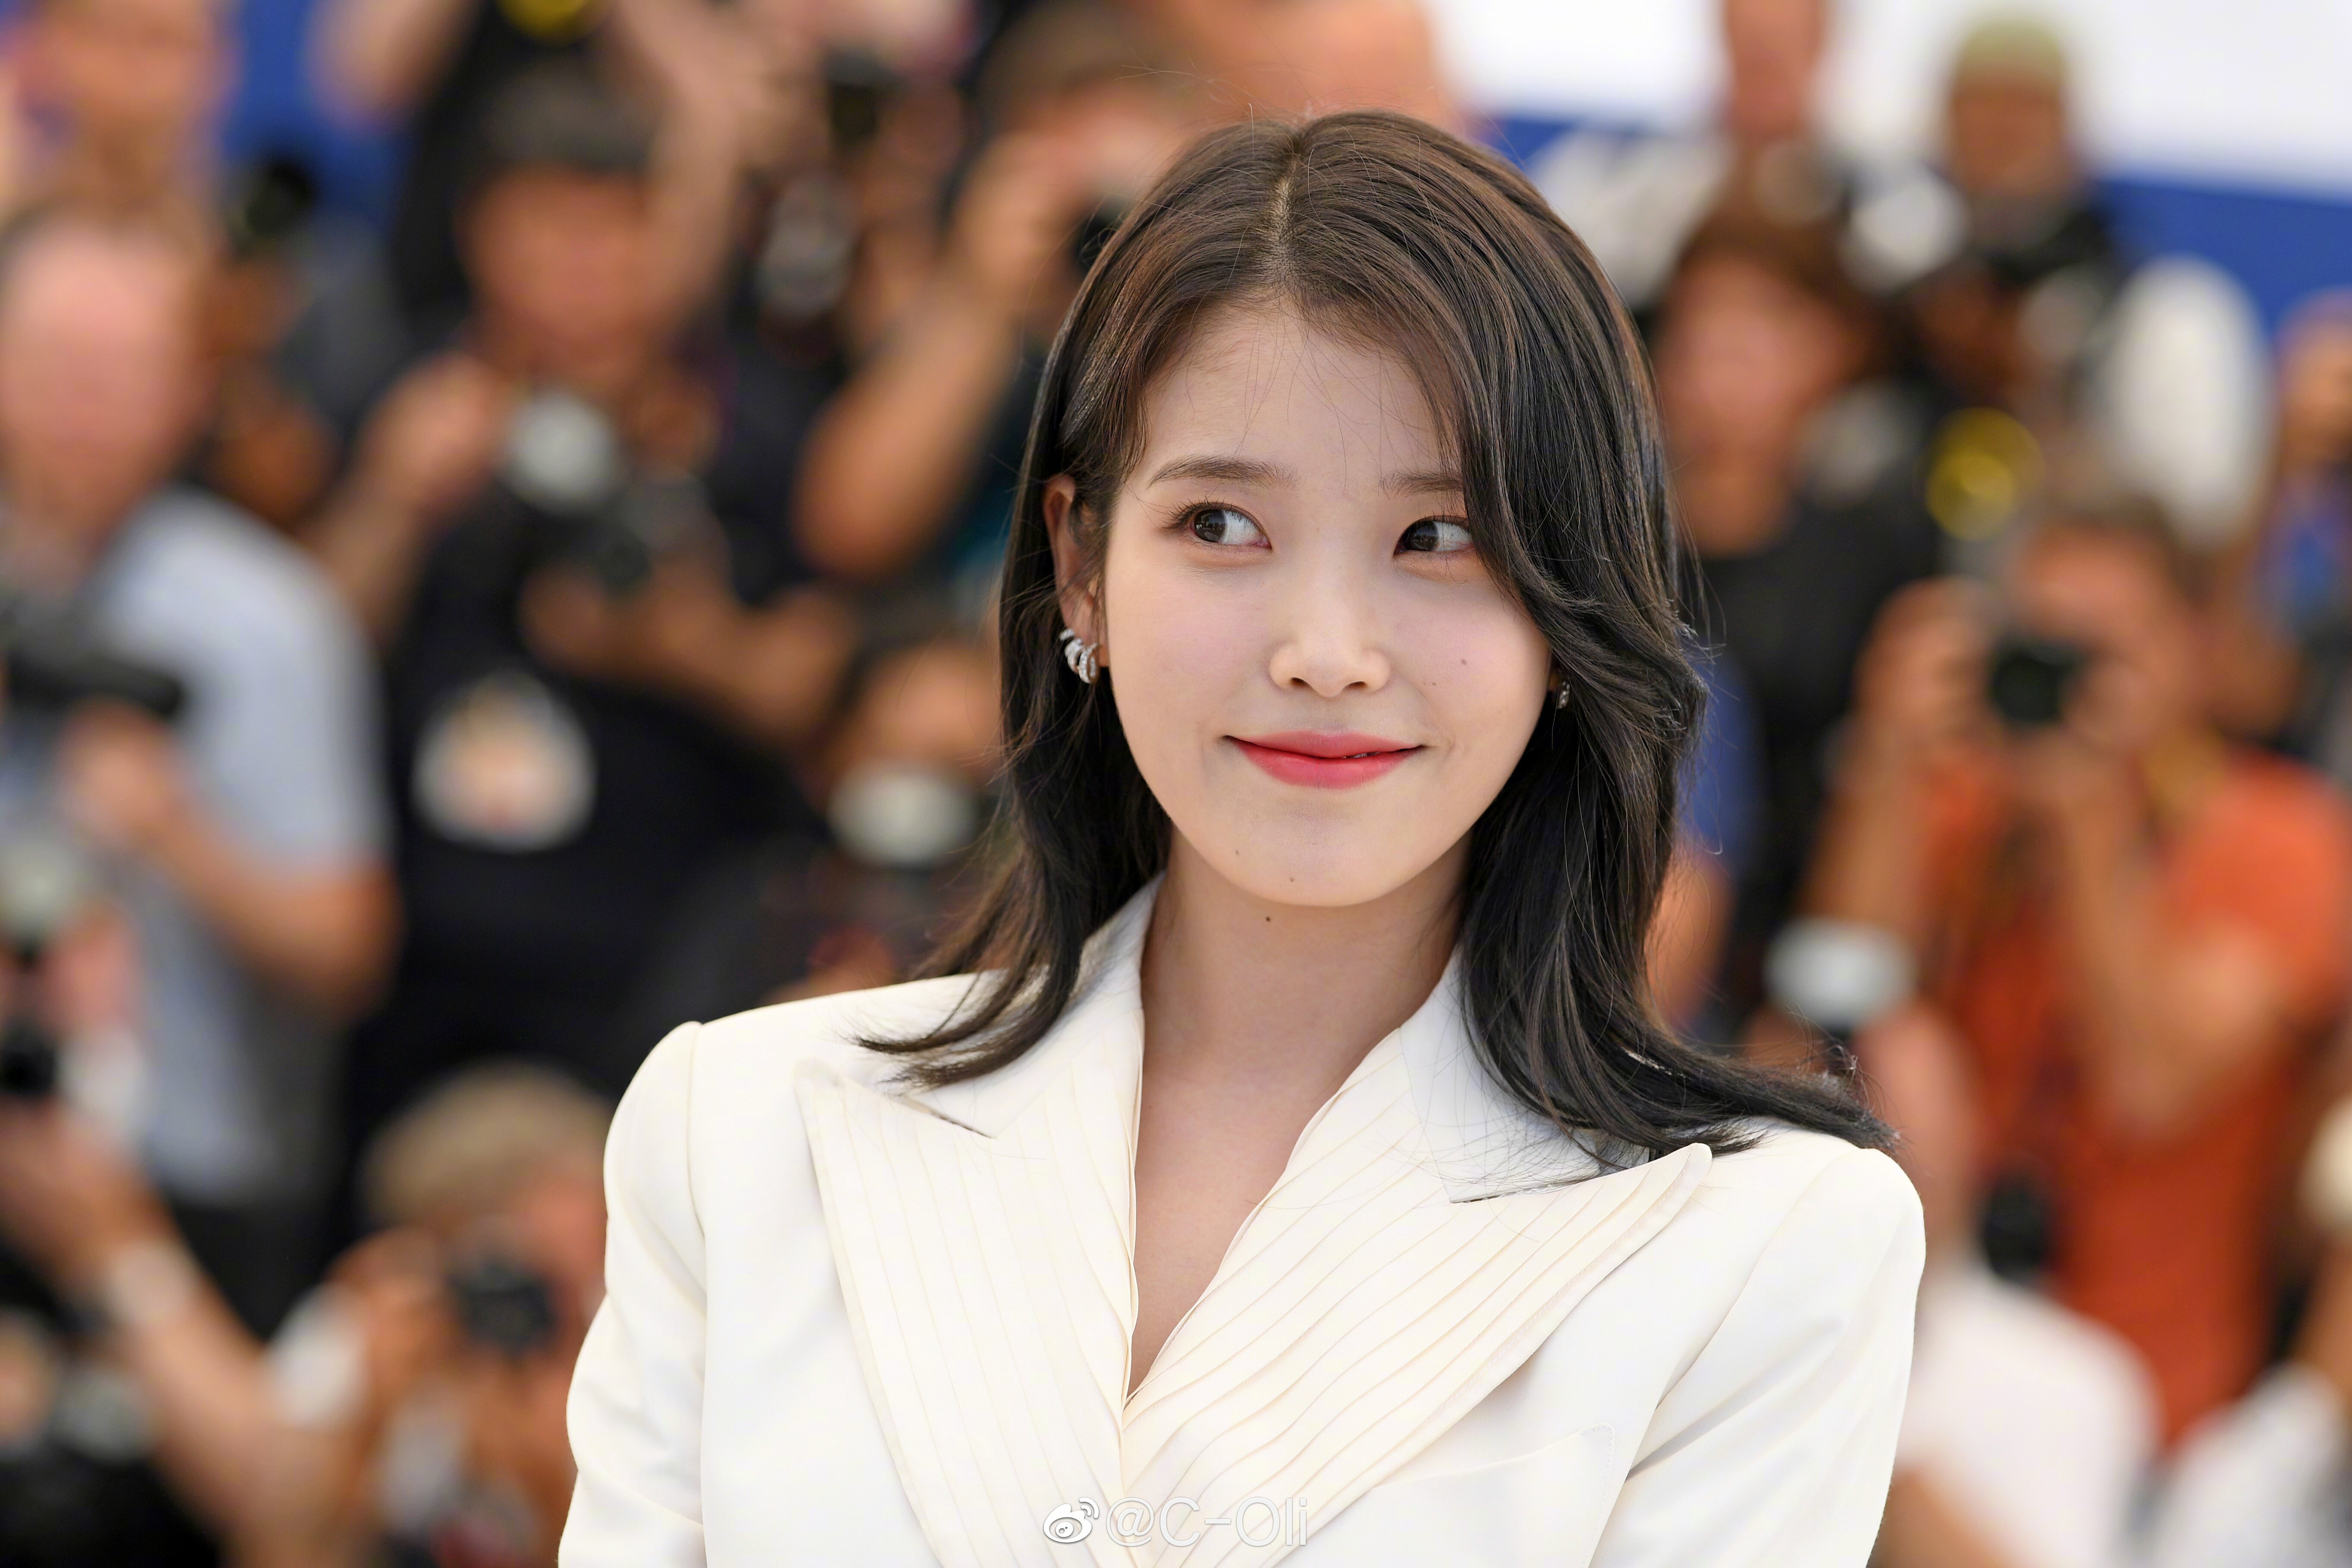 220527 IU - 'Broker' Photocall Event at 75th CANNES Film Festival ...